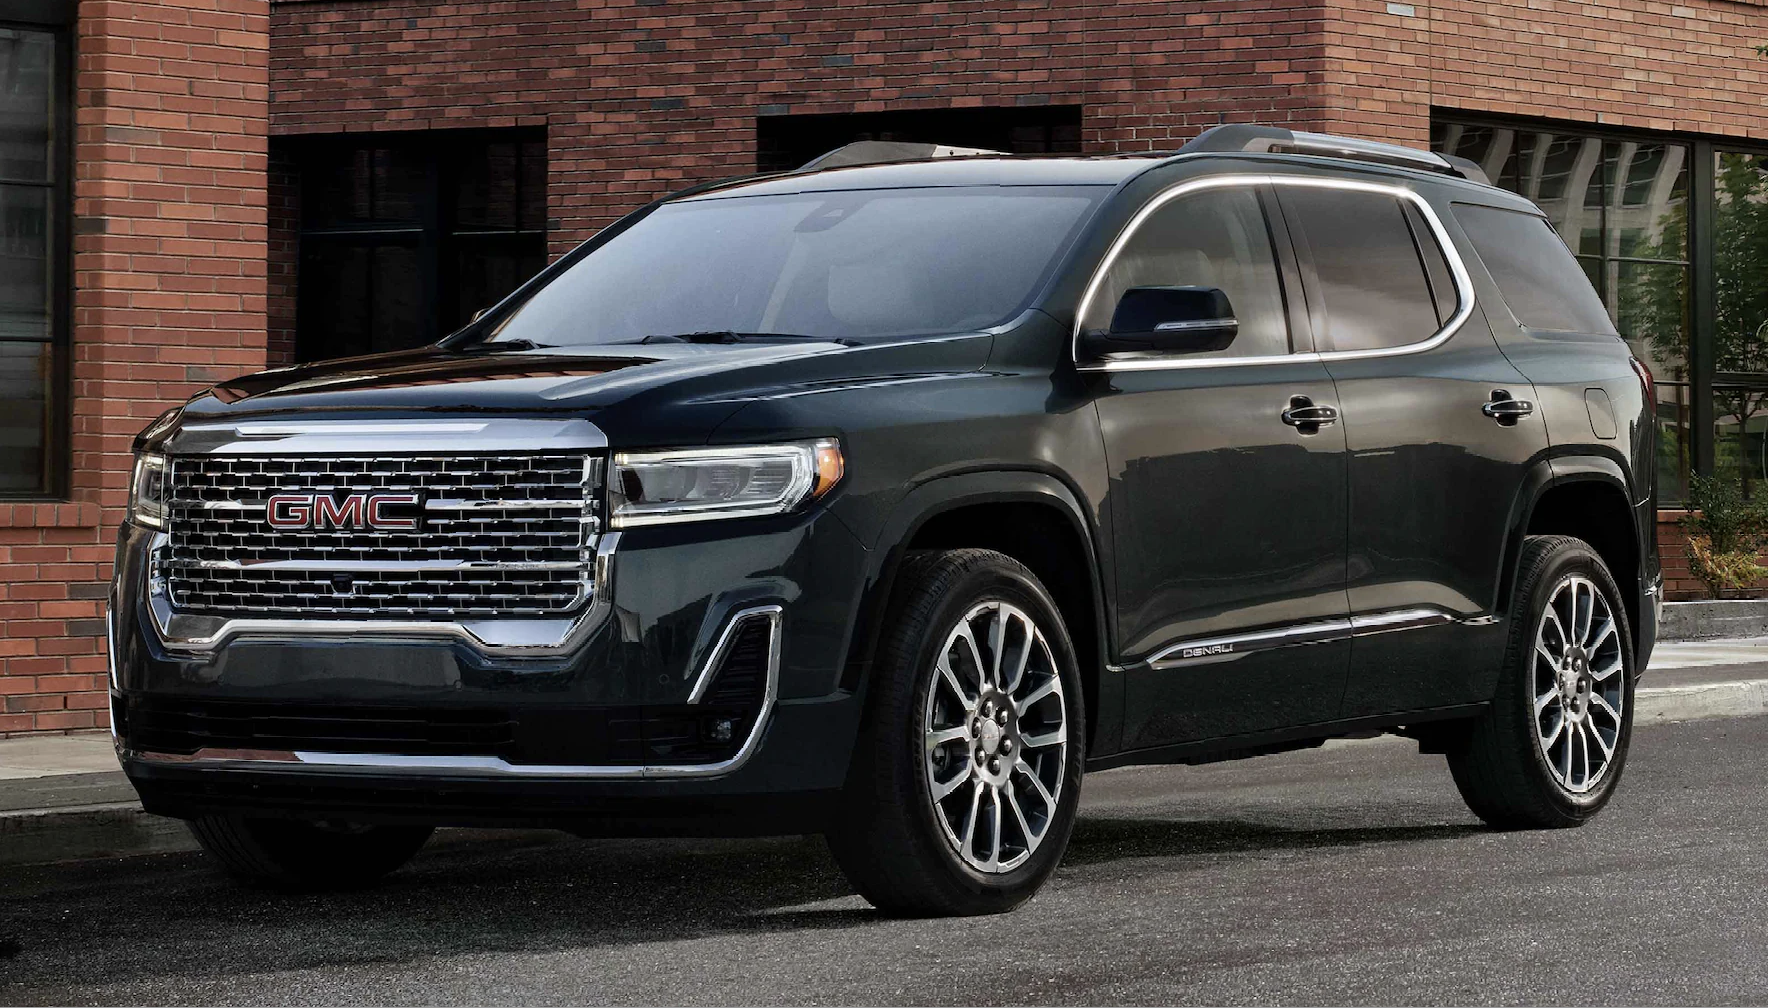 2023 GMC Acadia for Sale or Lease | Balise Chevrolet Buick GMC